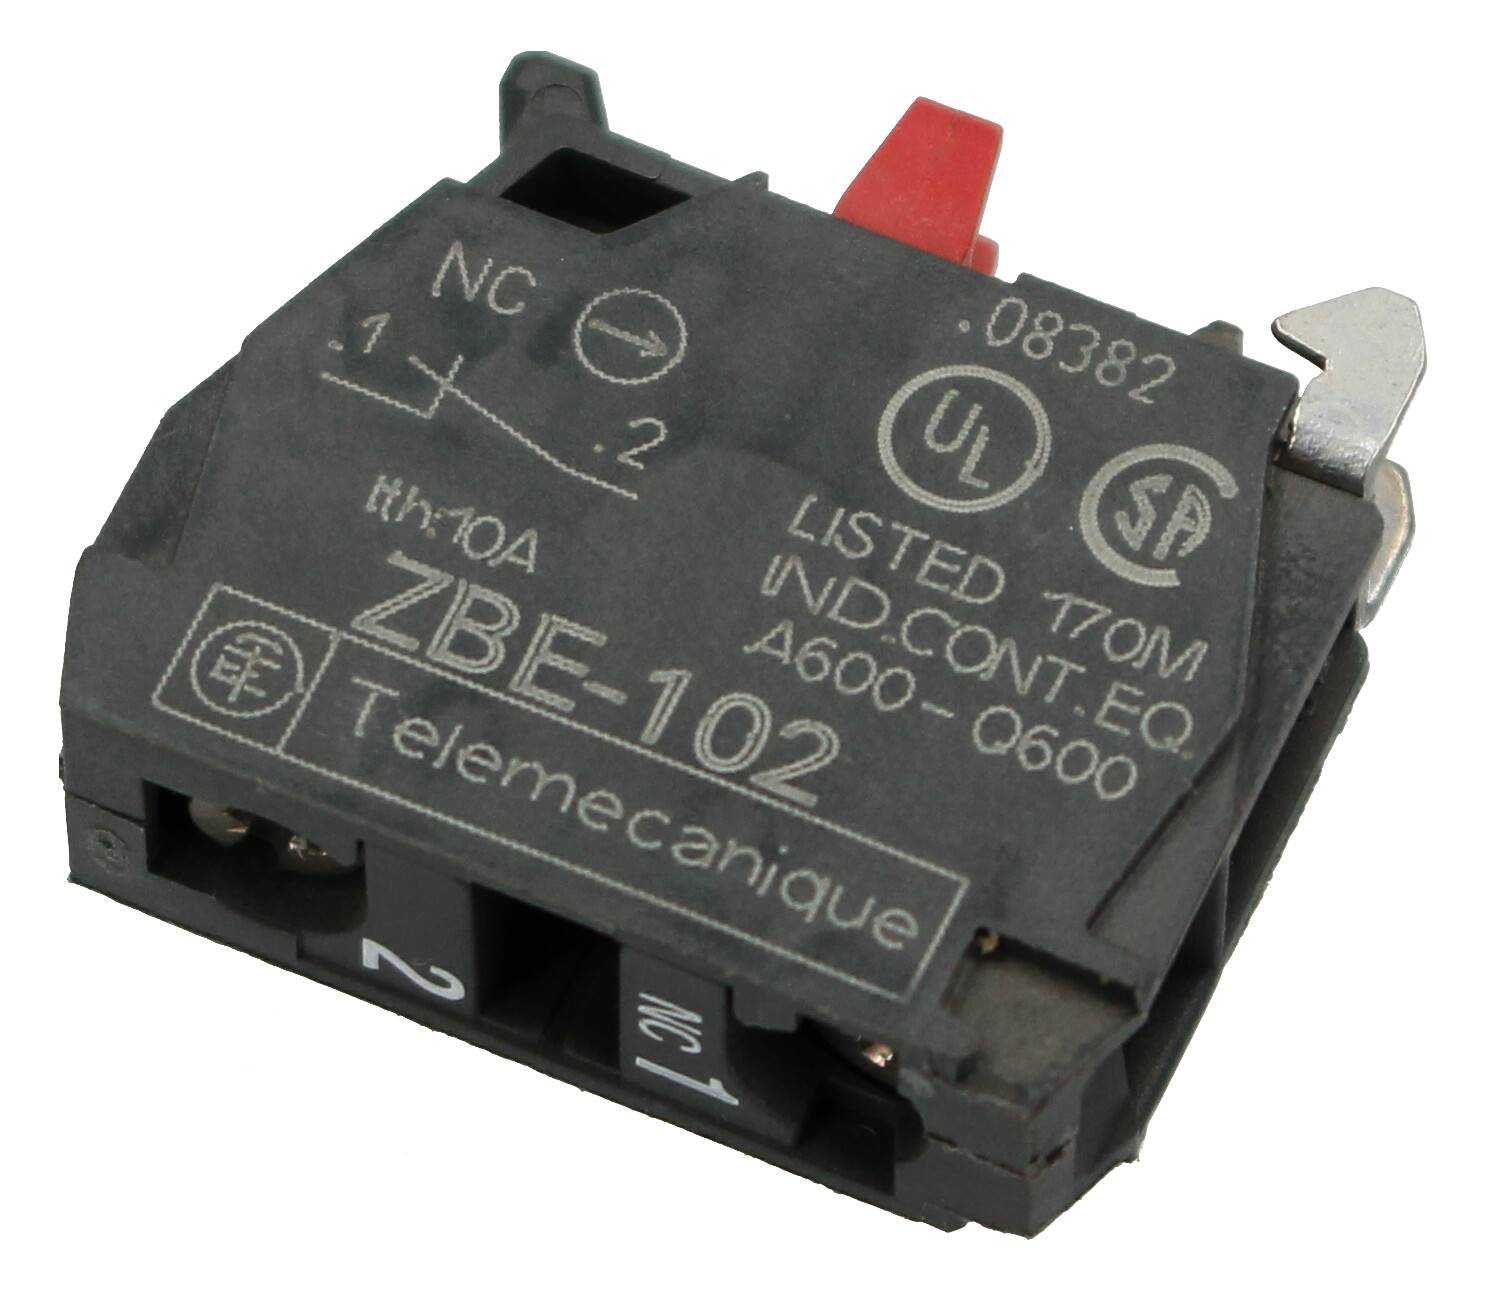 ZBE-102 CONTACT BLOCK FOR SCHNEIDER HEAD - Image 1